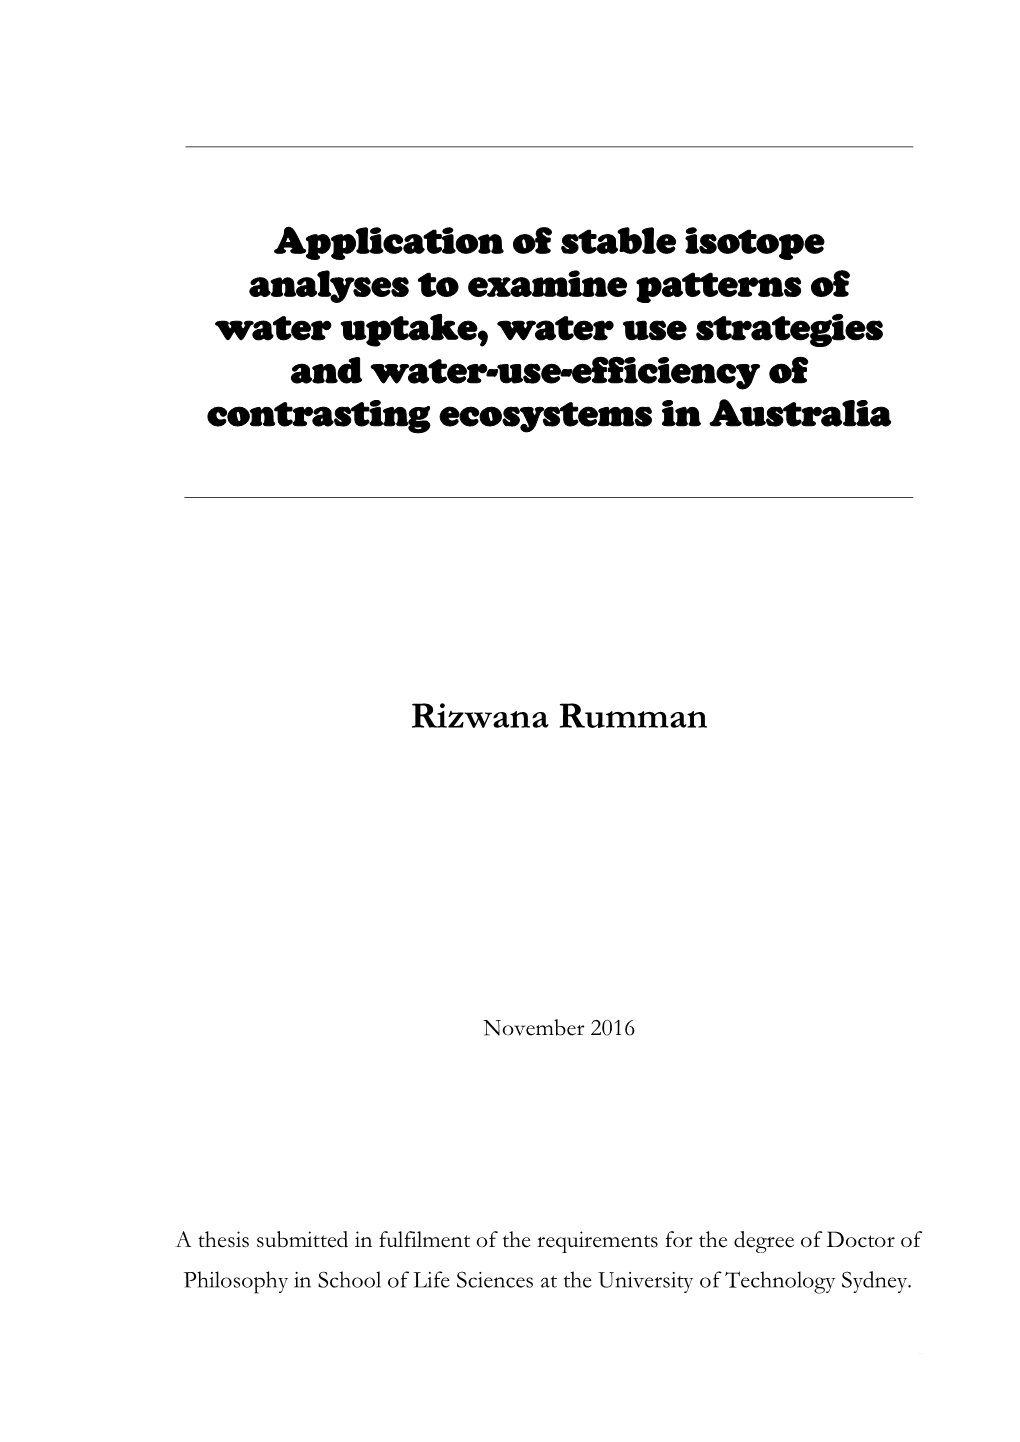 Application of Stable Isotope Analyses to Examine Patterns of Water Uptake, Water Use Strategies and Water-Use-Efficiency of Contrasting Ecosystems in Australia